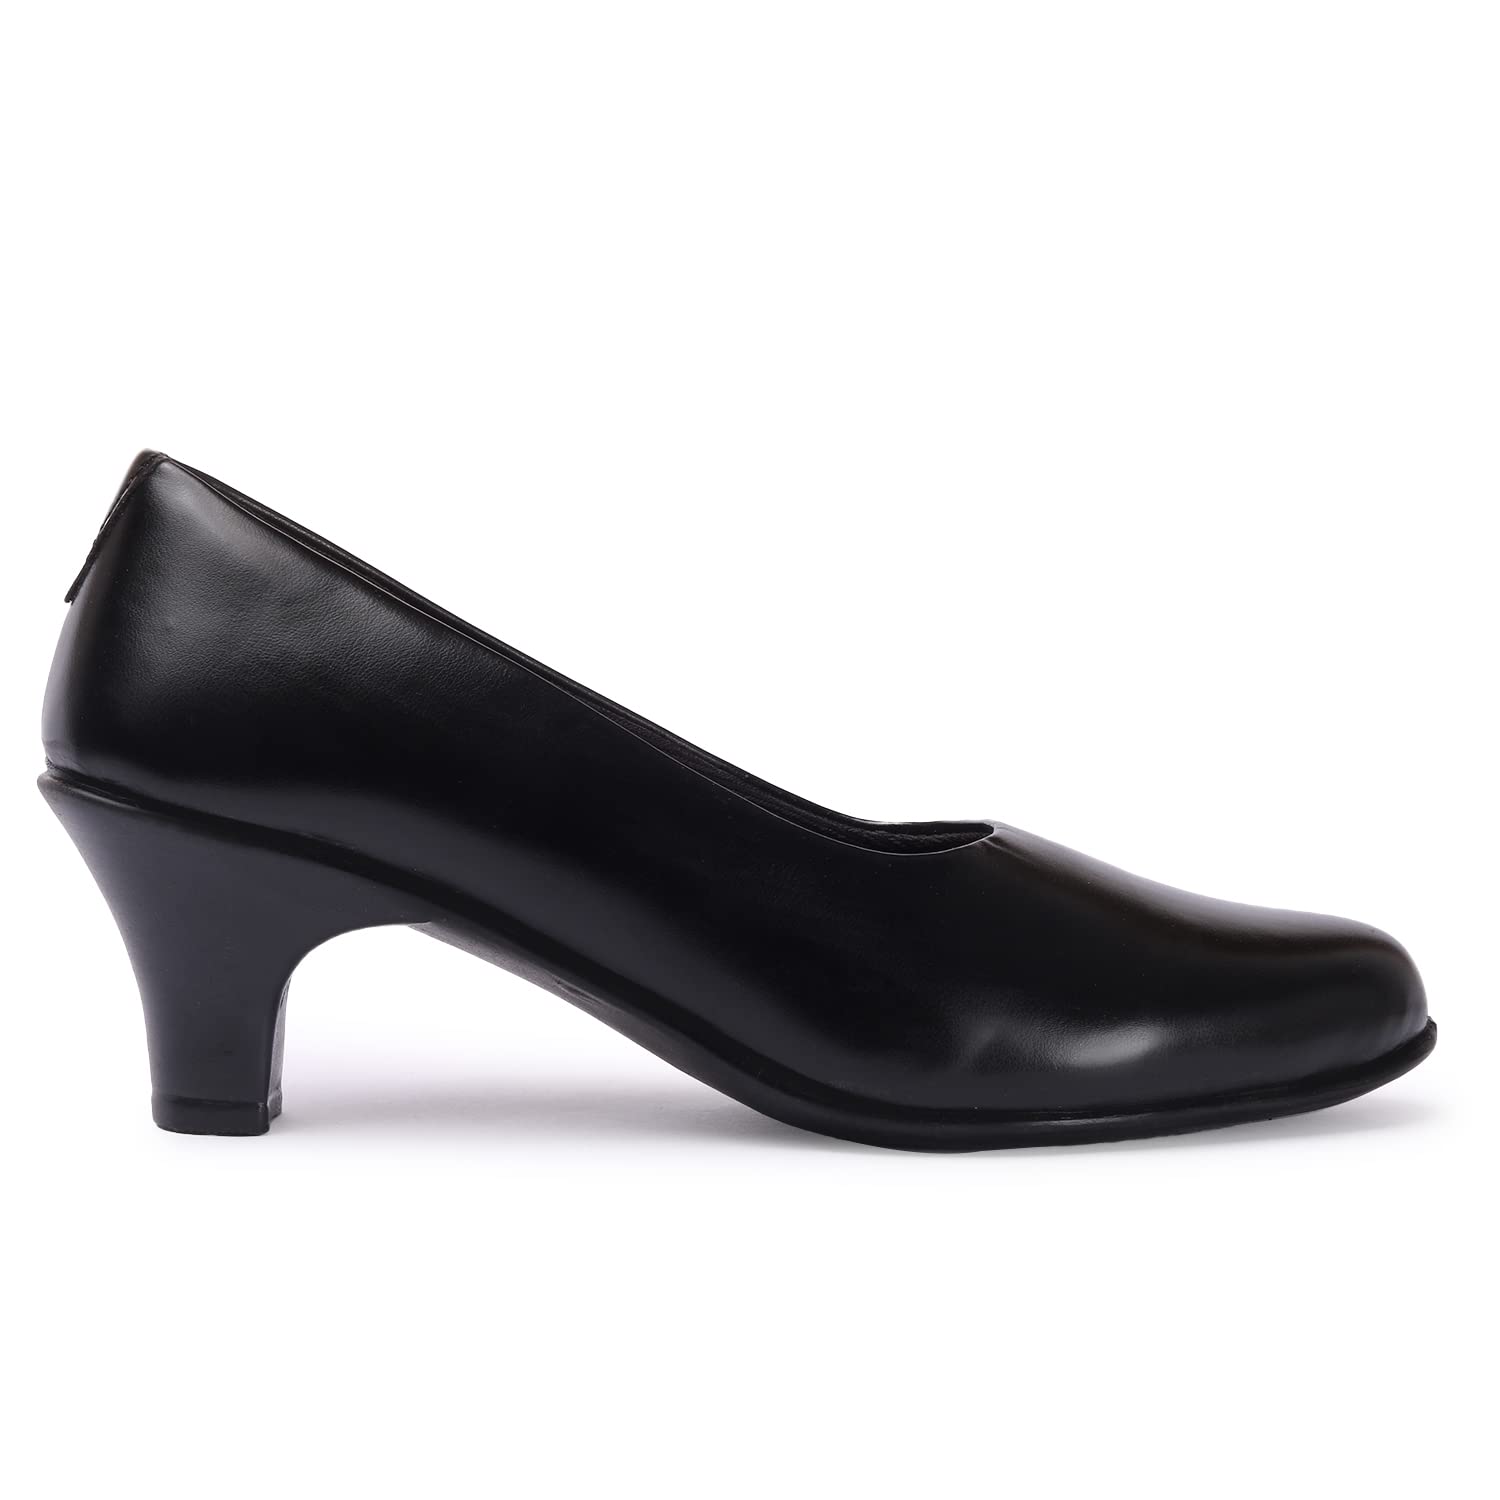 Women's Shoes on Sale: Sneakers, Boots, & More | Cole Haan